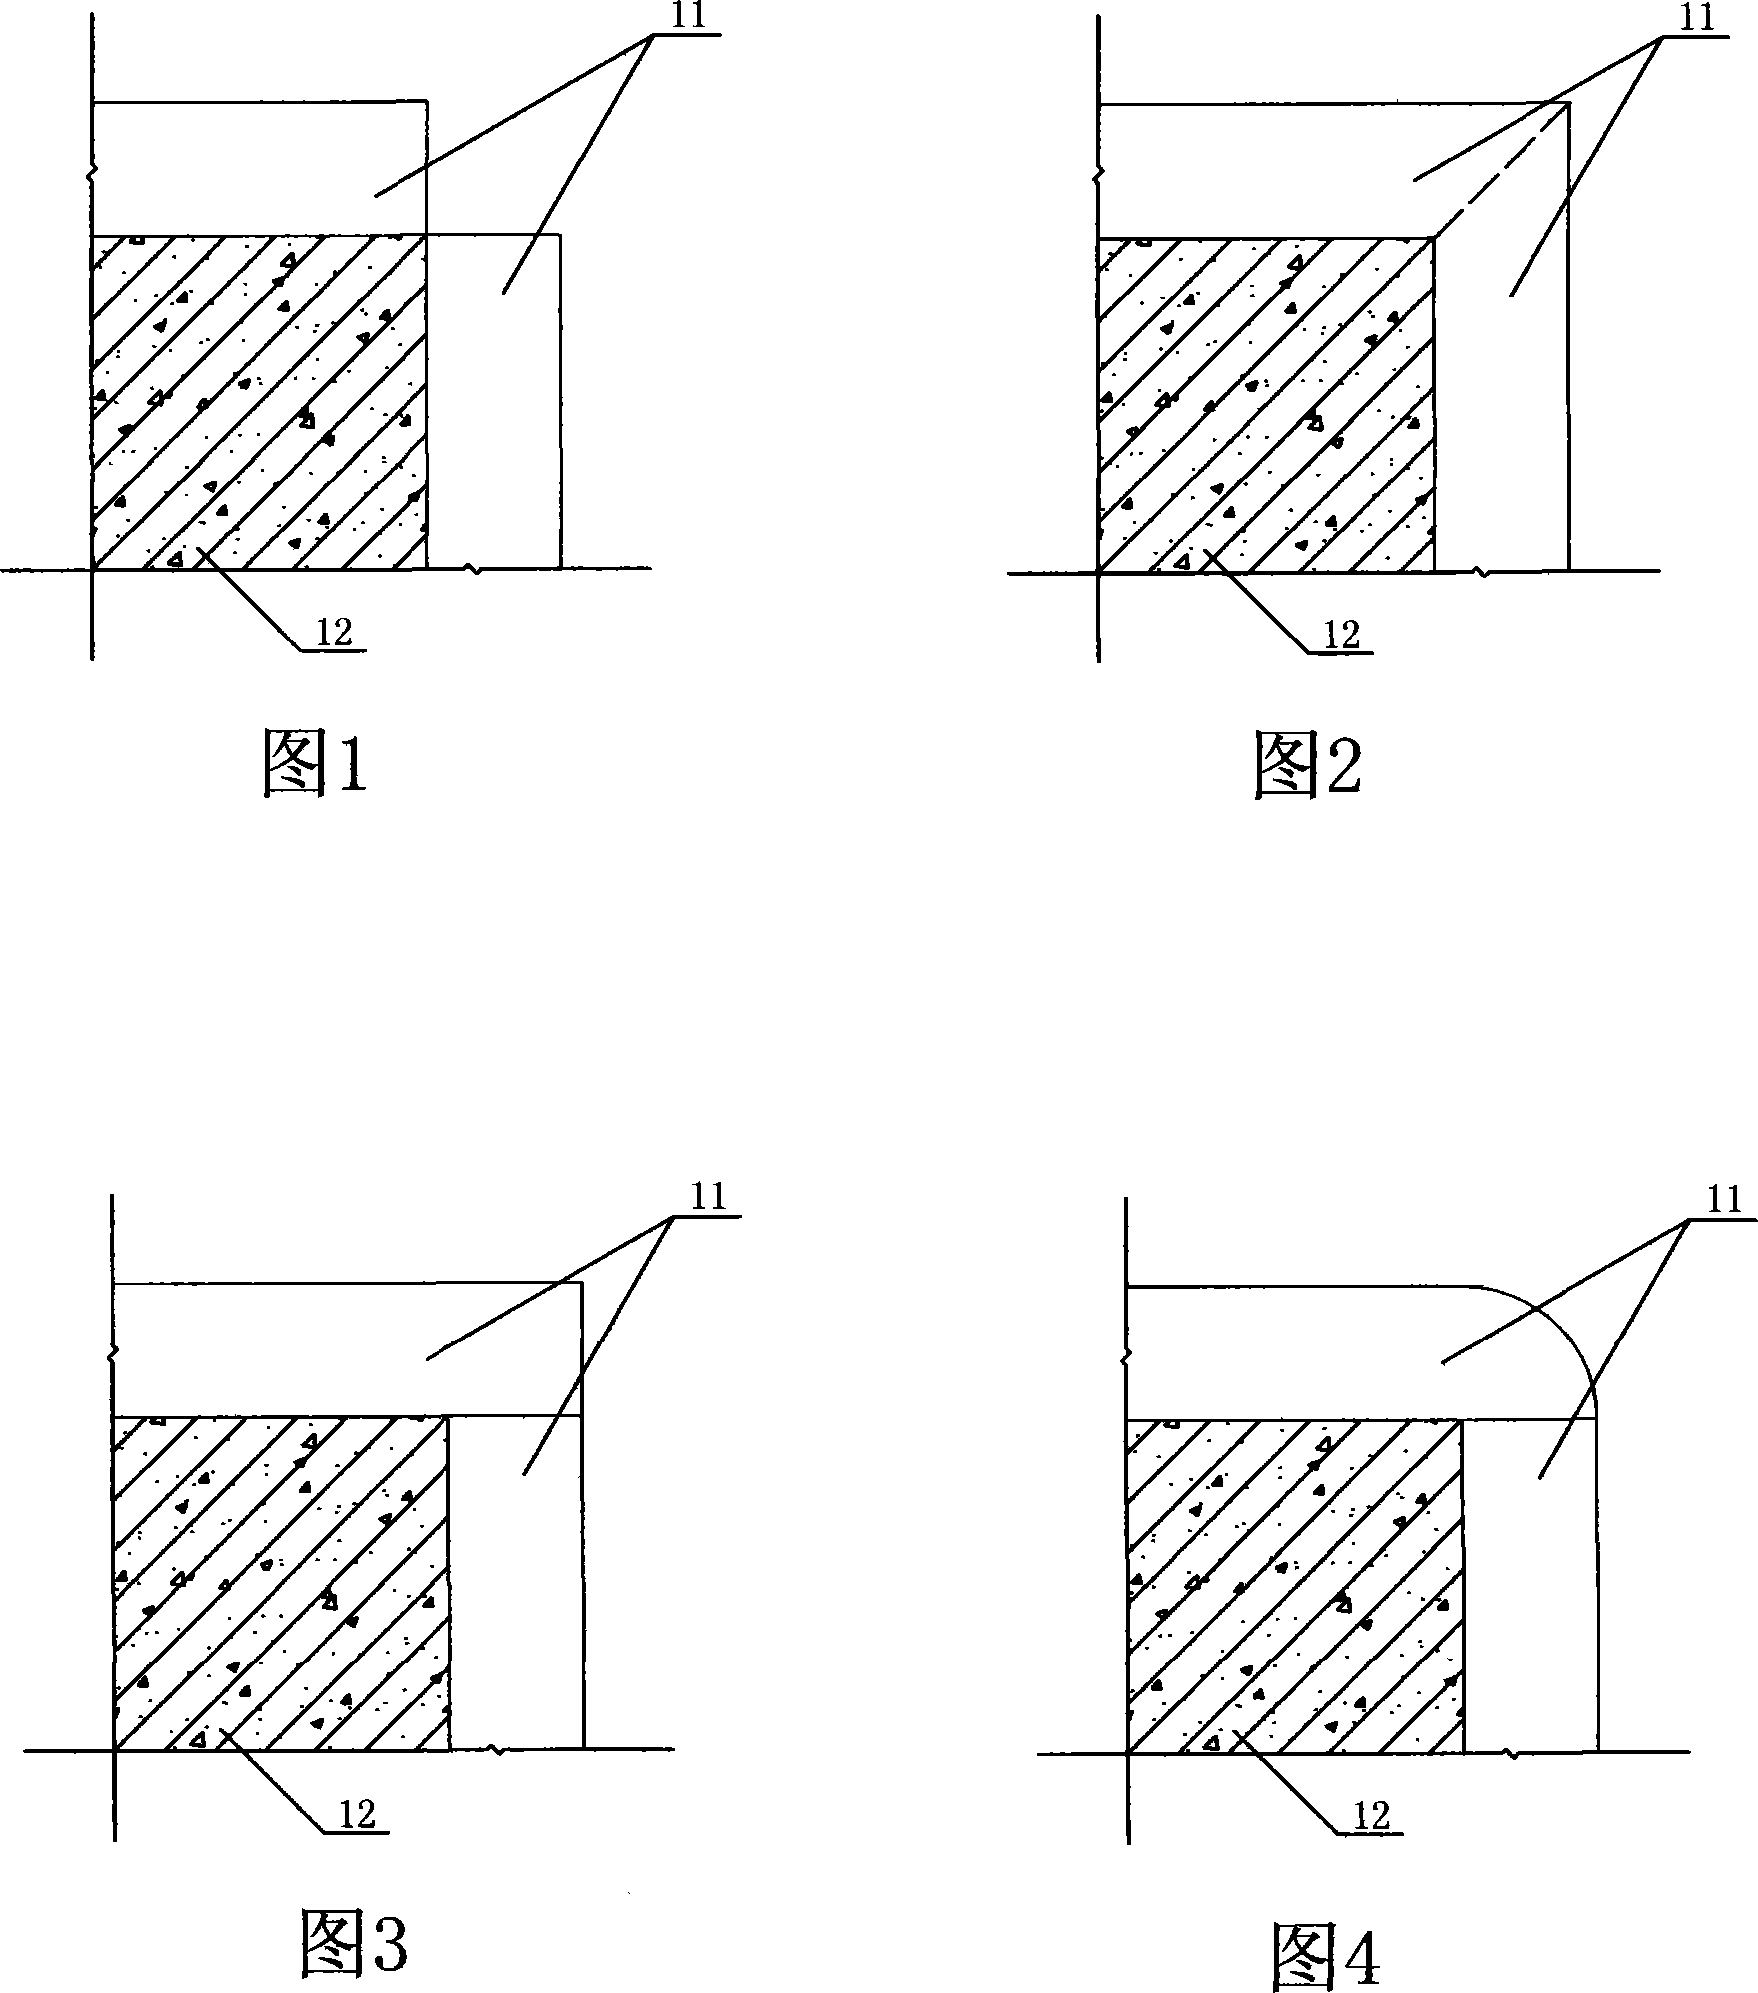 Construction technique for plastering vitrified brick at positive angle